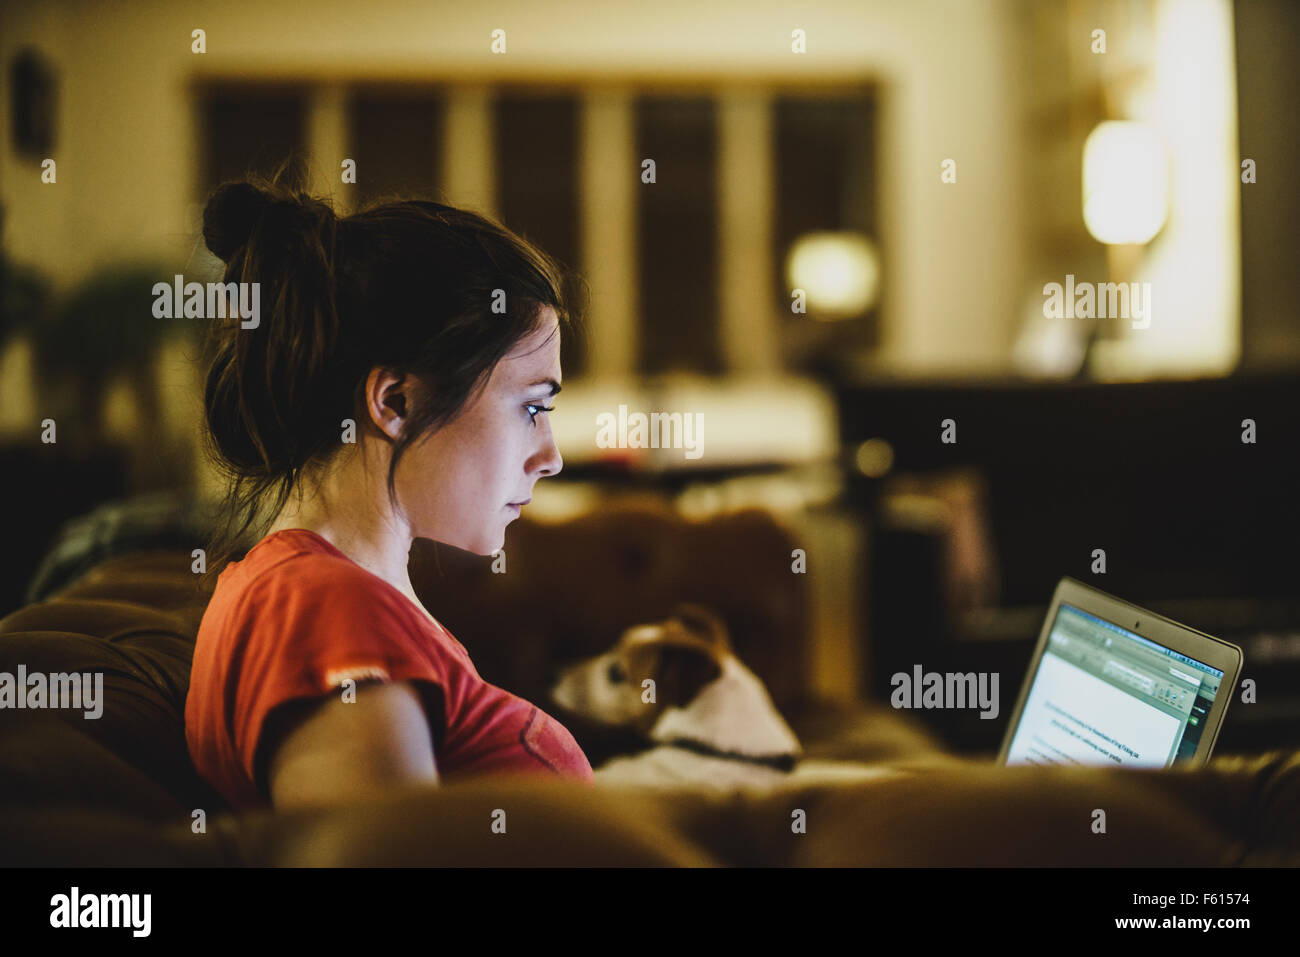 A young woman working on her laptop during the evening with her pet dog in the background Stock Photo